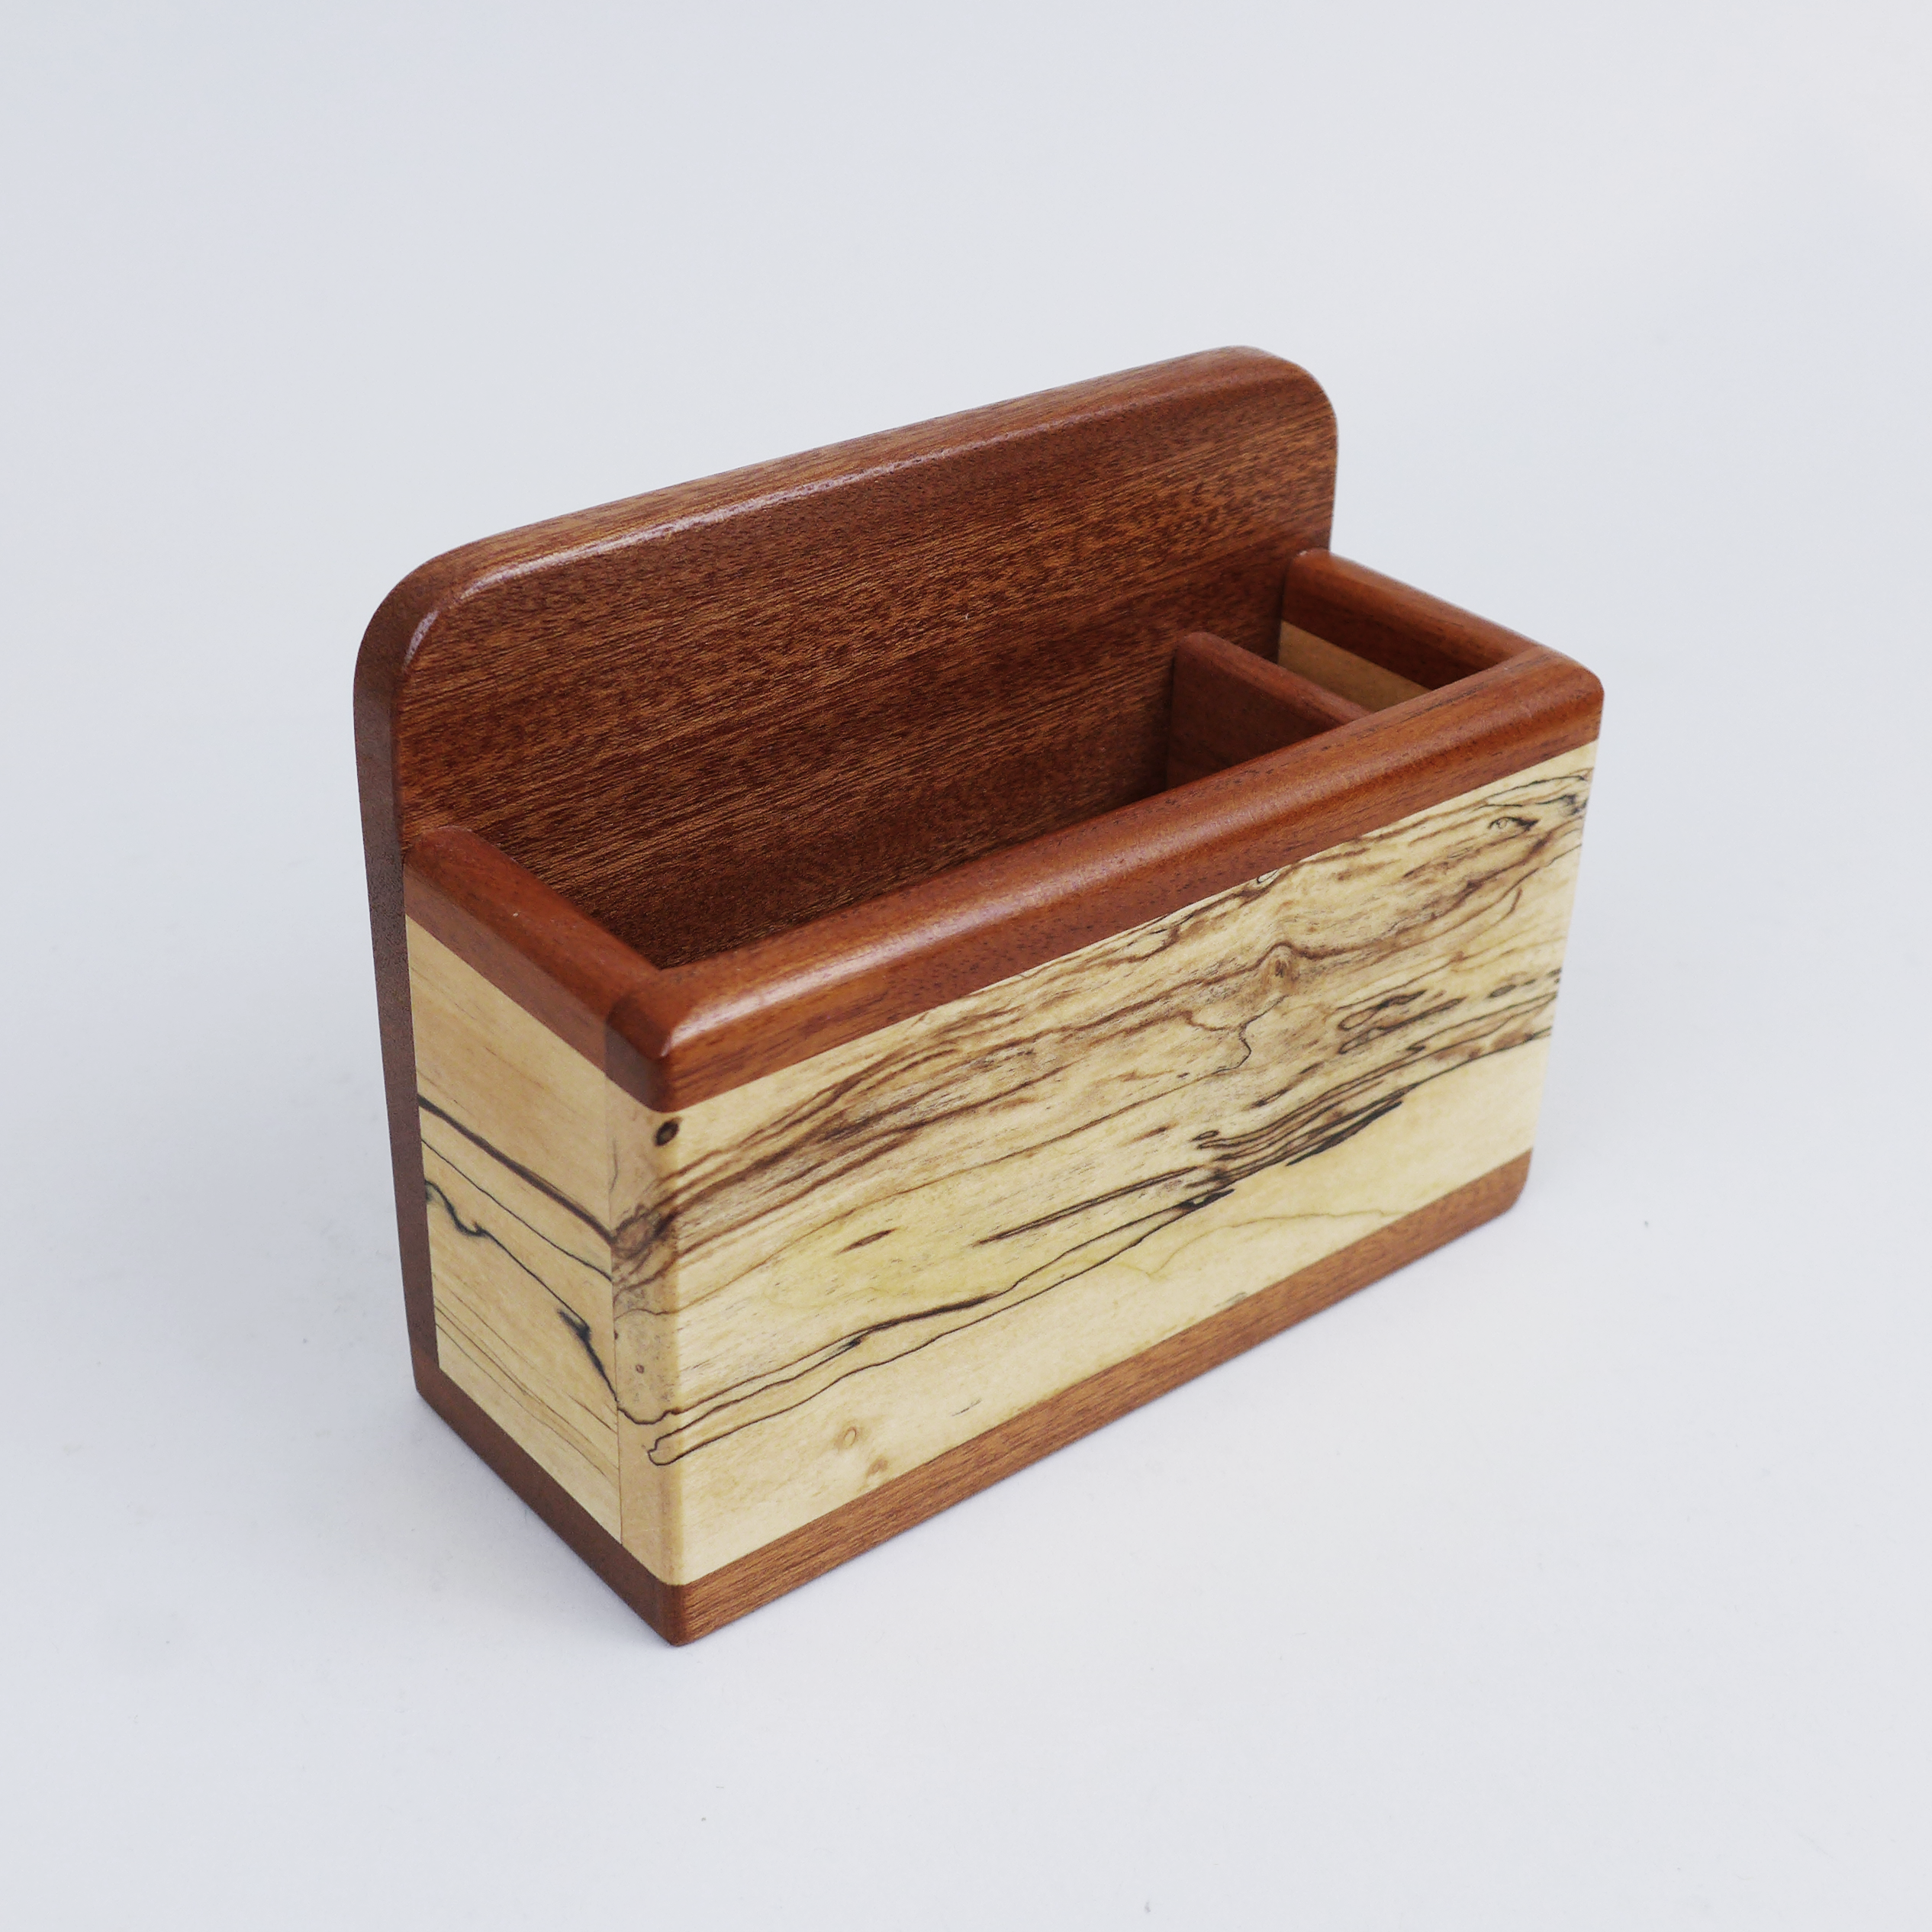 Wooden Item Holder by Natural Renaissance at the Center for Art in Wood